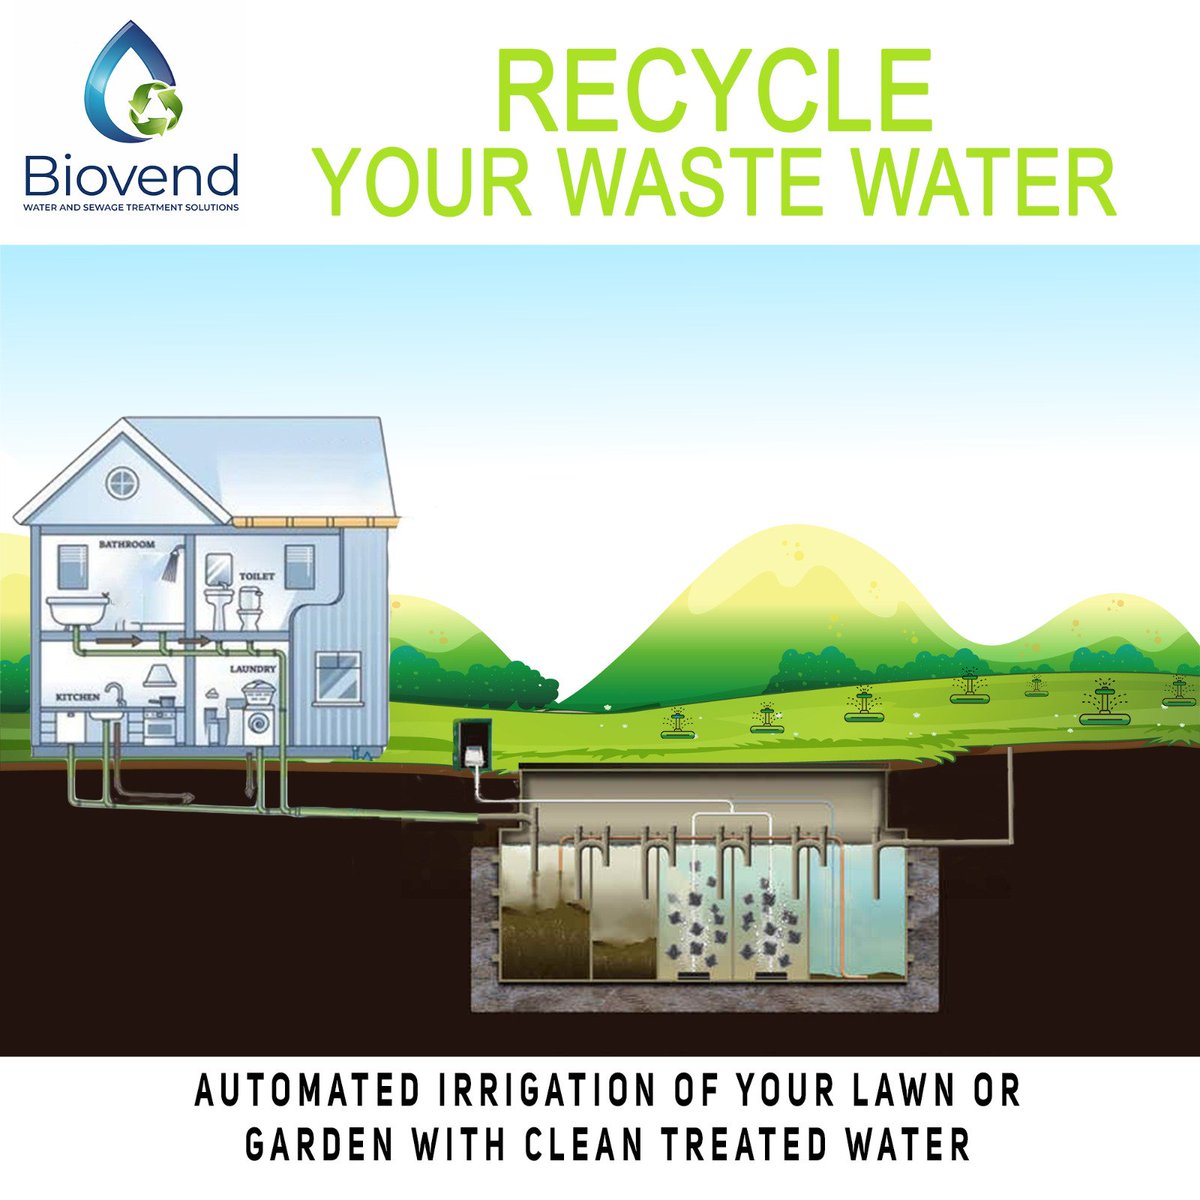 Install our sewage treatment plants and use your waste water on your lawn. Don't use paid water and never call an exhauster to empty your septic tank. 
#biodigester
#sewagetreatmentplant 
#sewagetreatment 
#SewagePollution 
#sewagesystem 
#watertreatmentplant 
#watertreatmentsolu